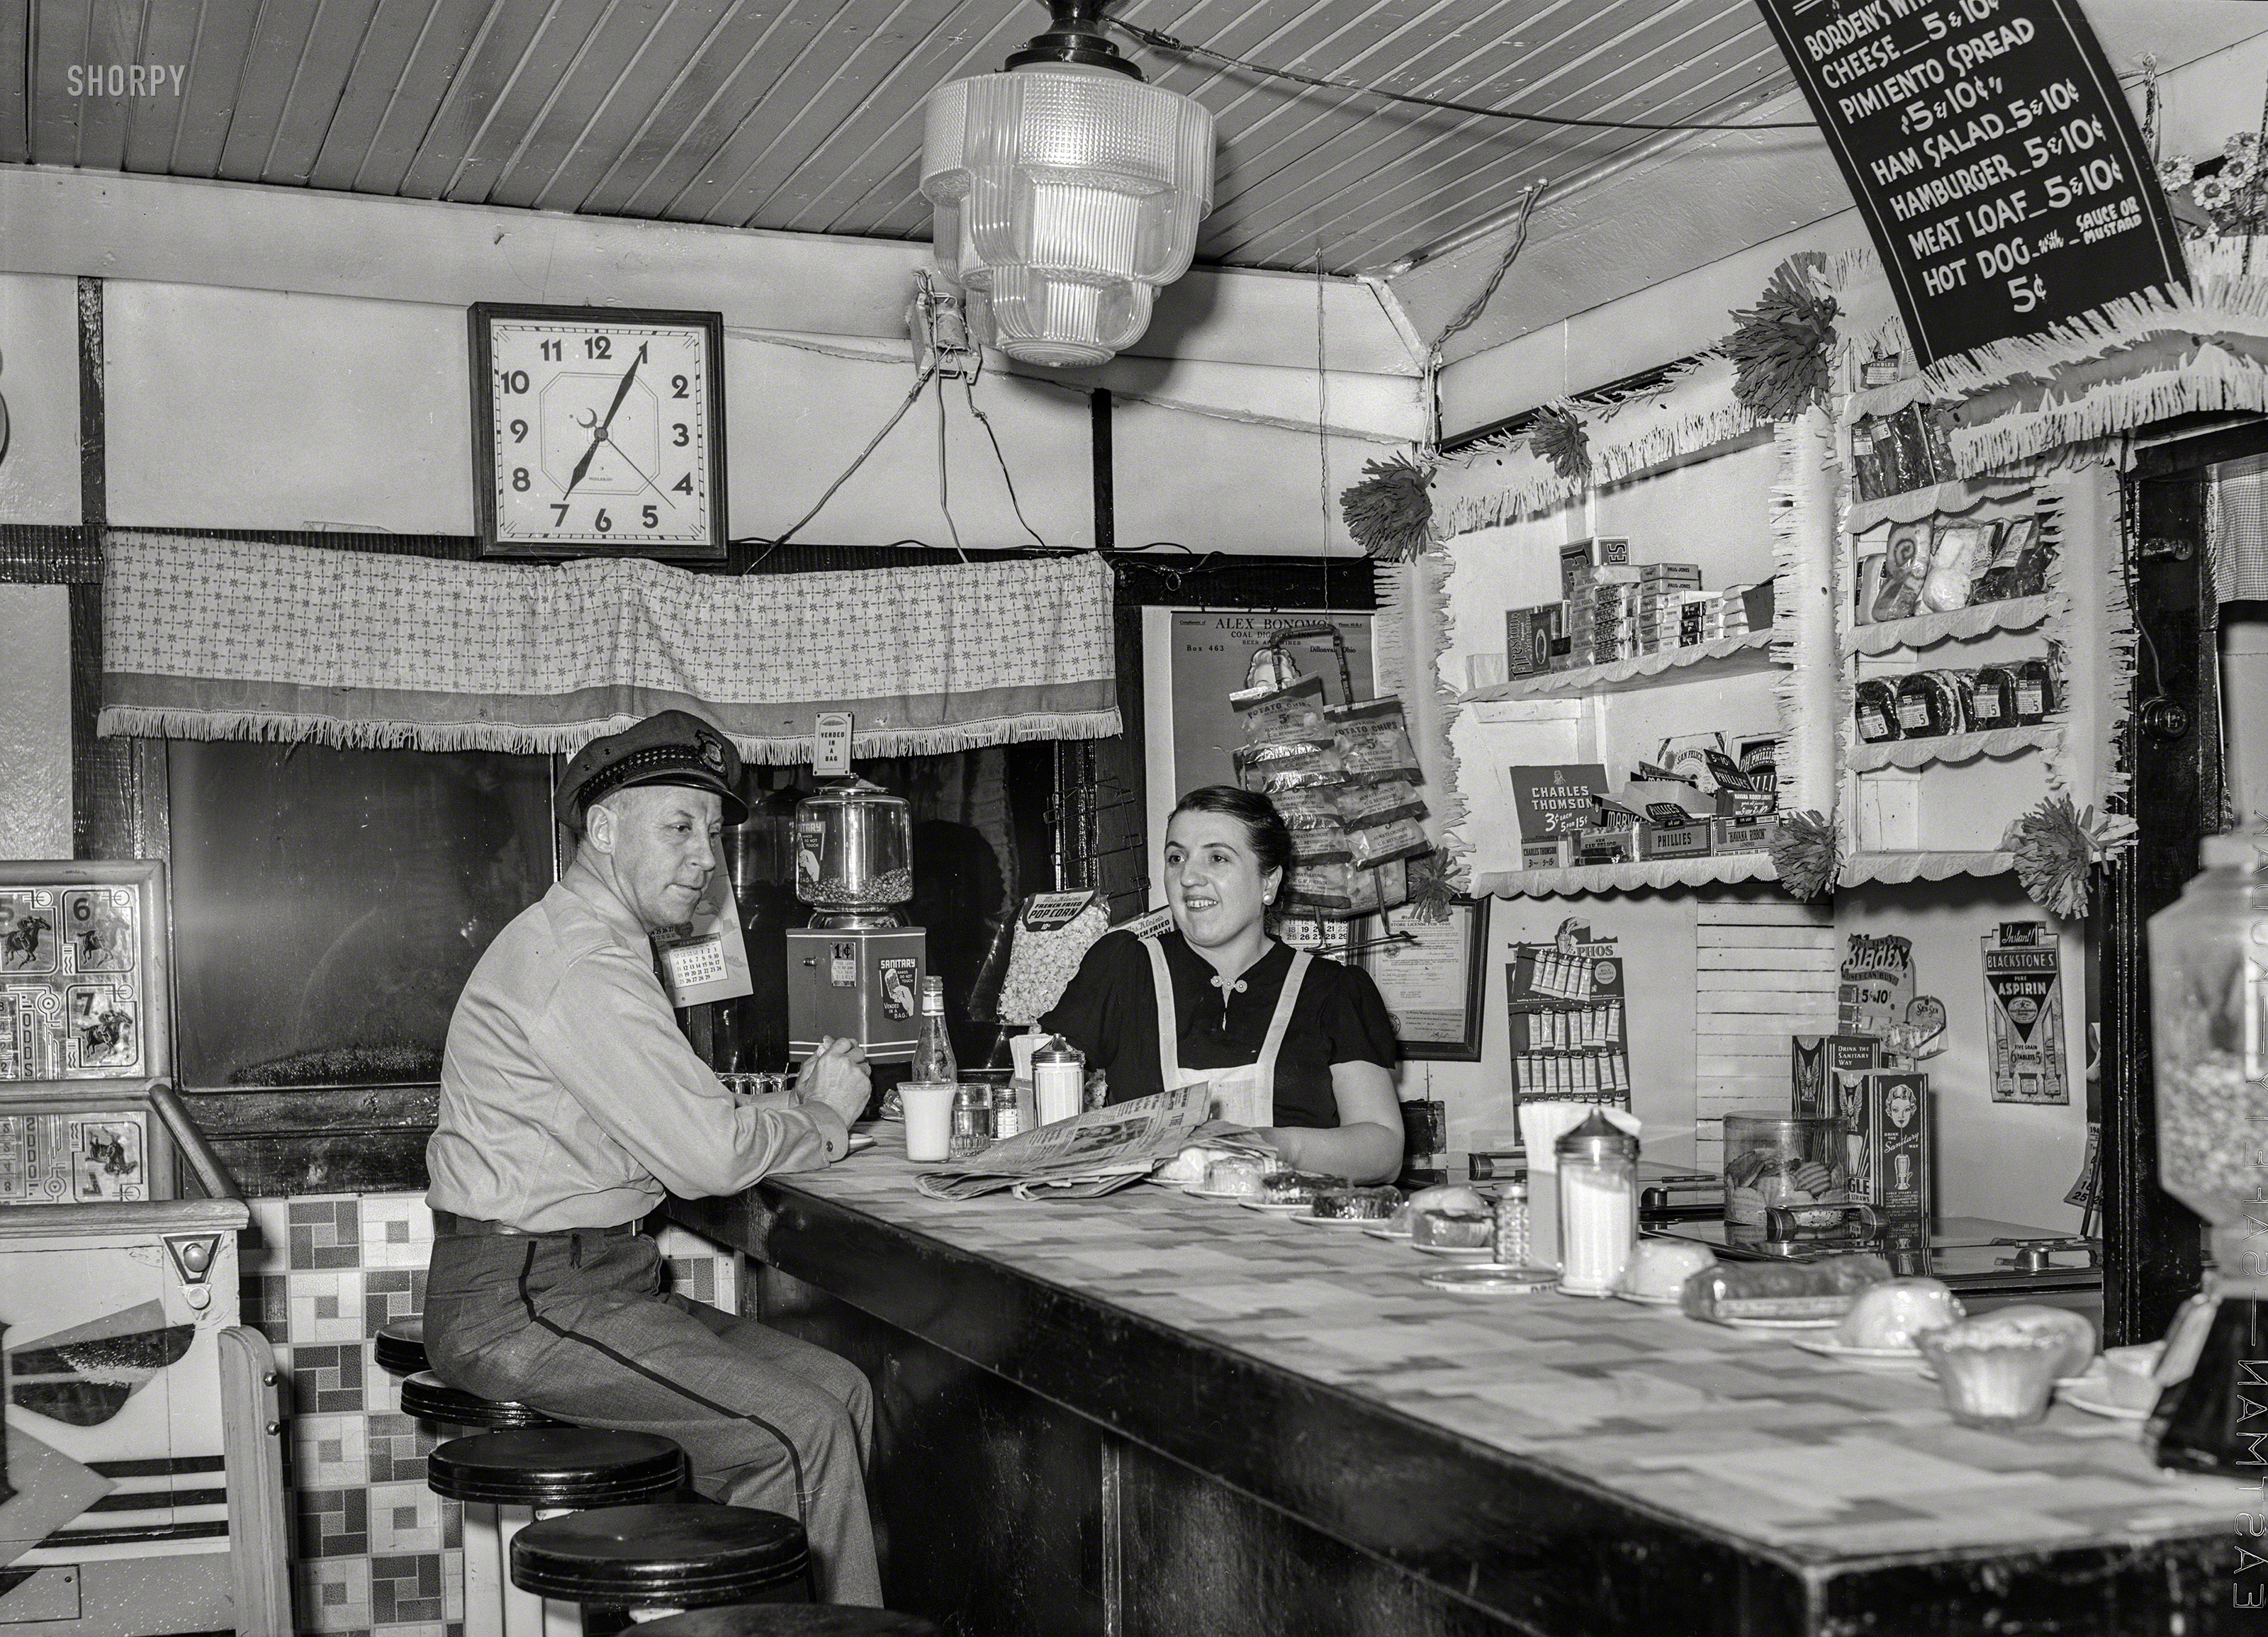 February 1940. "Truck driver in diner. Clinton, Indiana." Medium format negative by Arthur Rothstein for the Farm Security Administration. View full size.